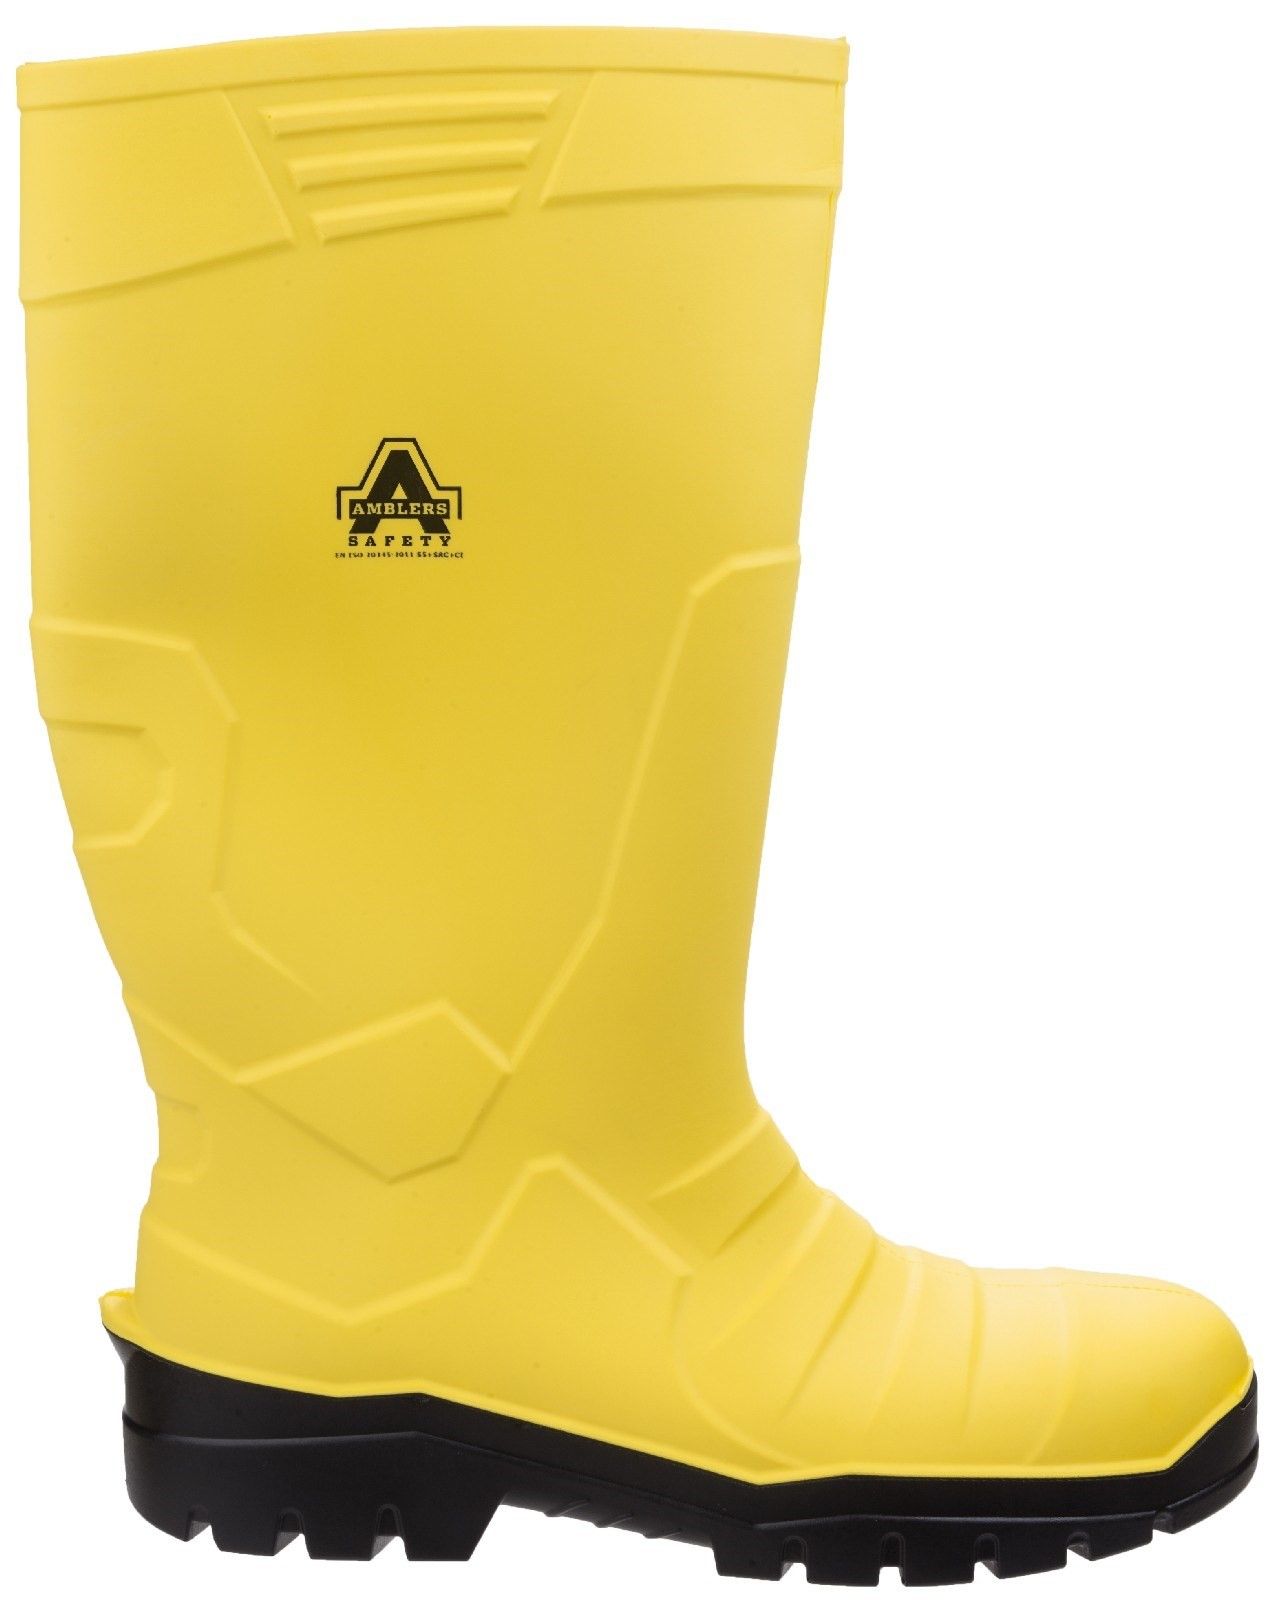 LIGHT! STRONG! COMFORTABLE! WARM! Versatile full safety wellington featuring S5 safety components.  The uppers are expertly designed to enhance water run-off and internal thermal insulation protects against temperatures as low as -20 degrees c.Polyurethane textile lining. 
Thermal insulation up to -20C. 
Removable insole for extra comfort. 
Sole resistant to oils, fats, acids and organic solvents. 
Slip resistant and anti-static sole.